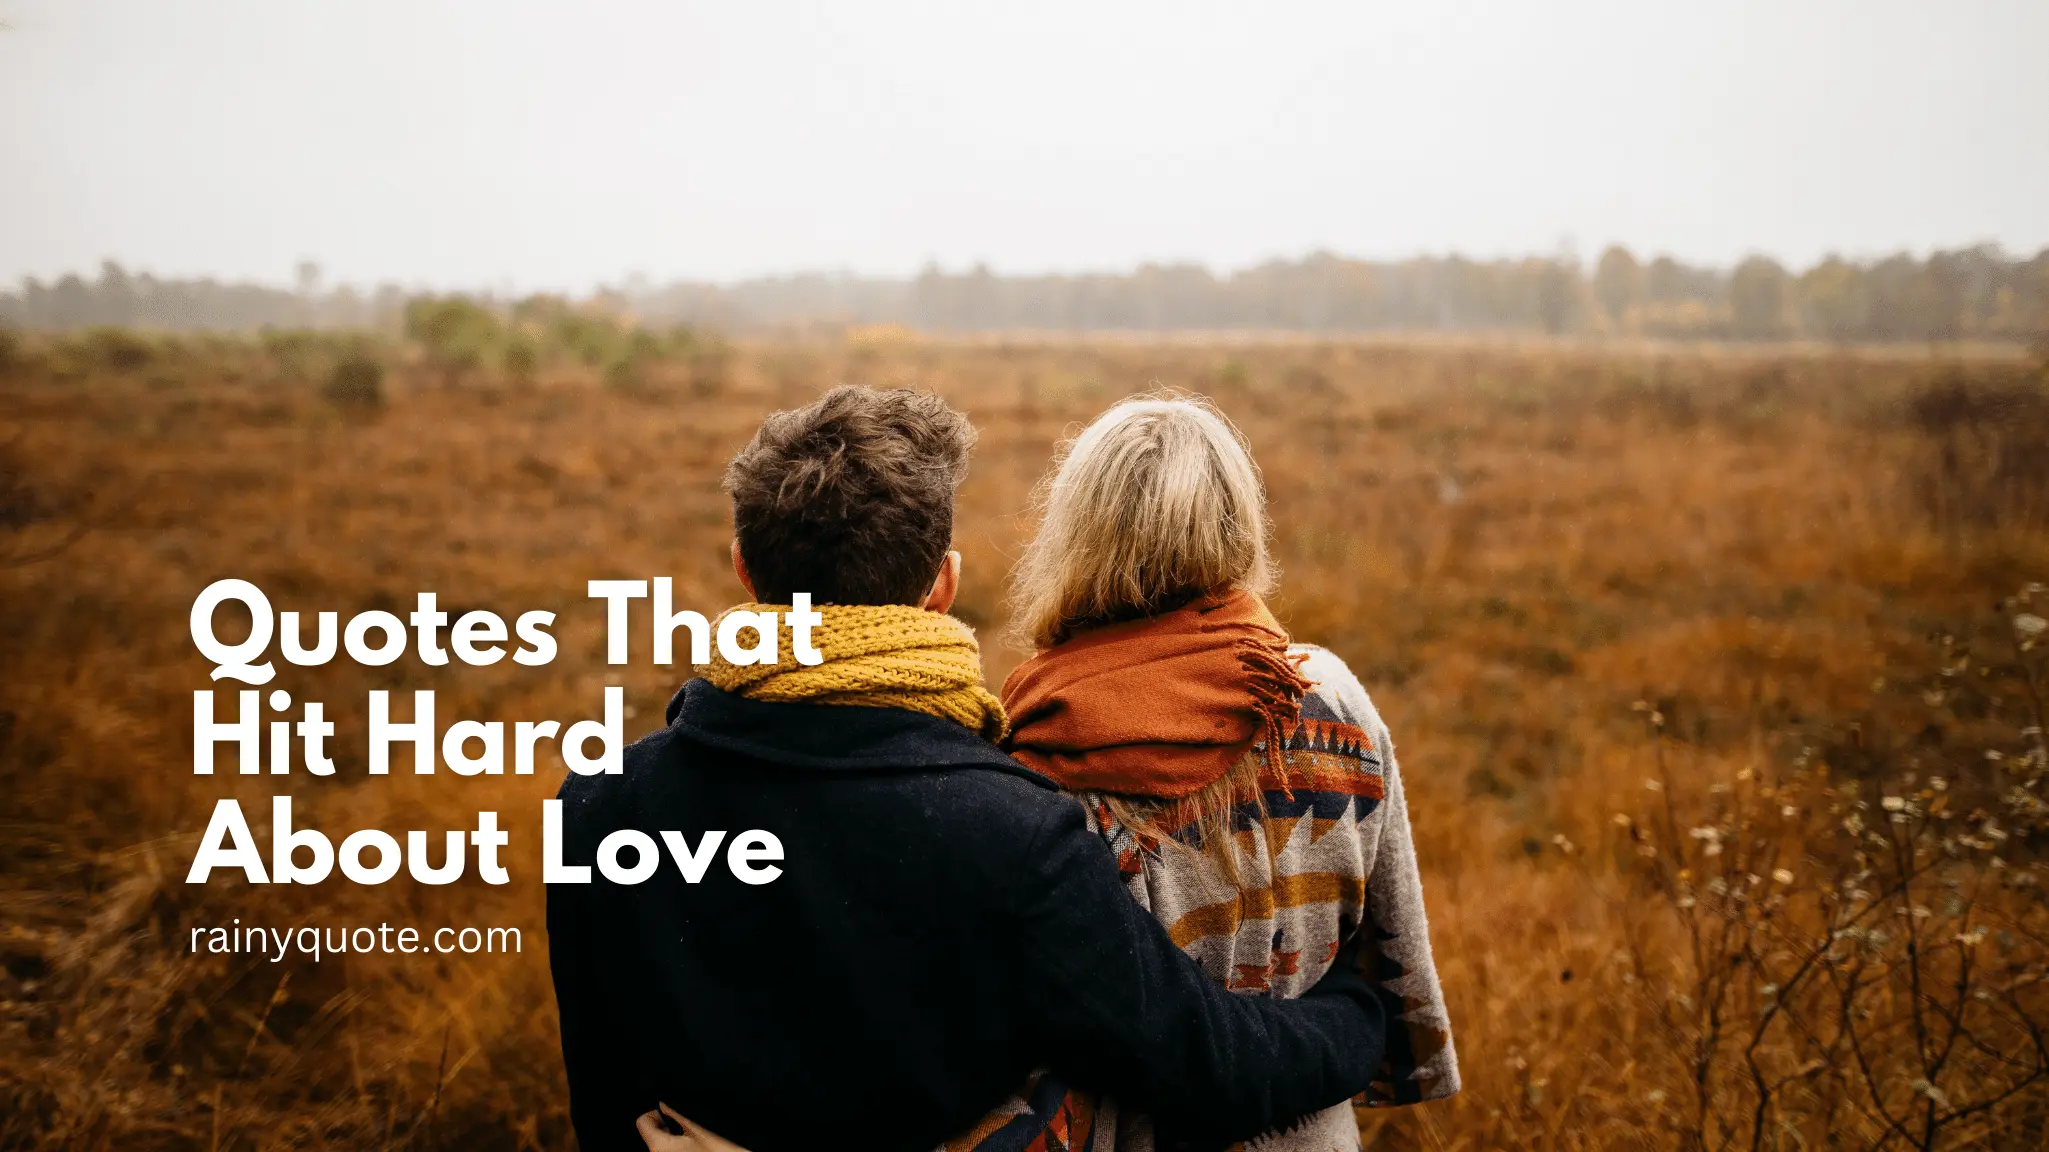 Quotes That Hit Hard About Love